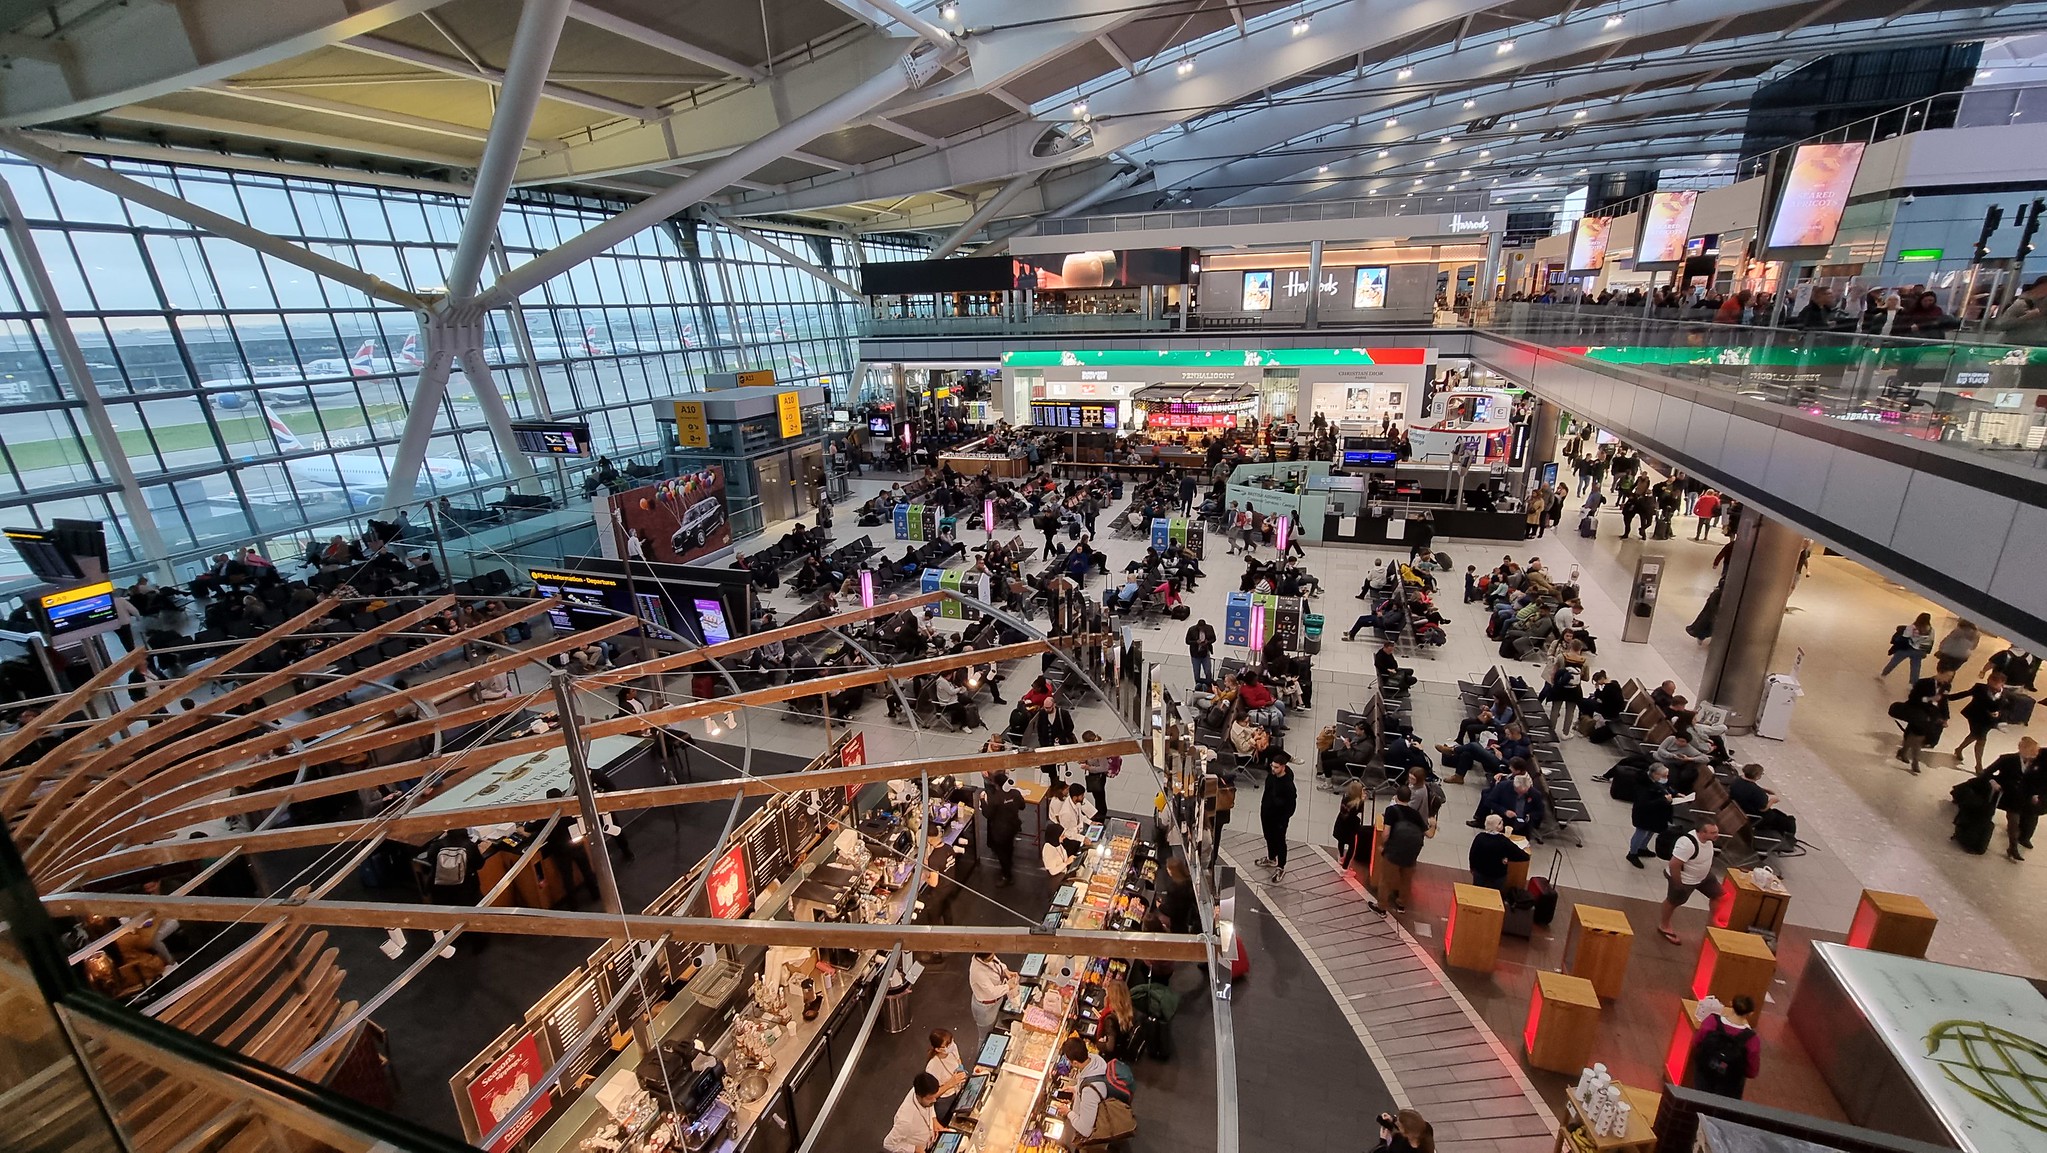 A view of Heathrow T5